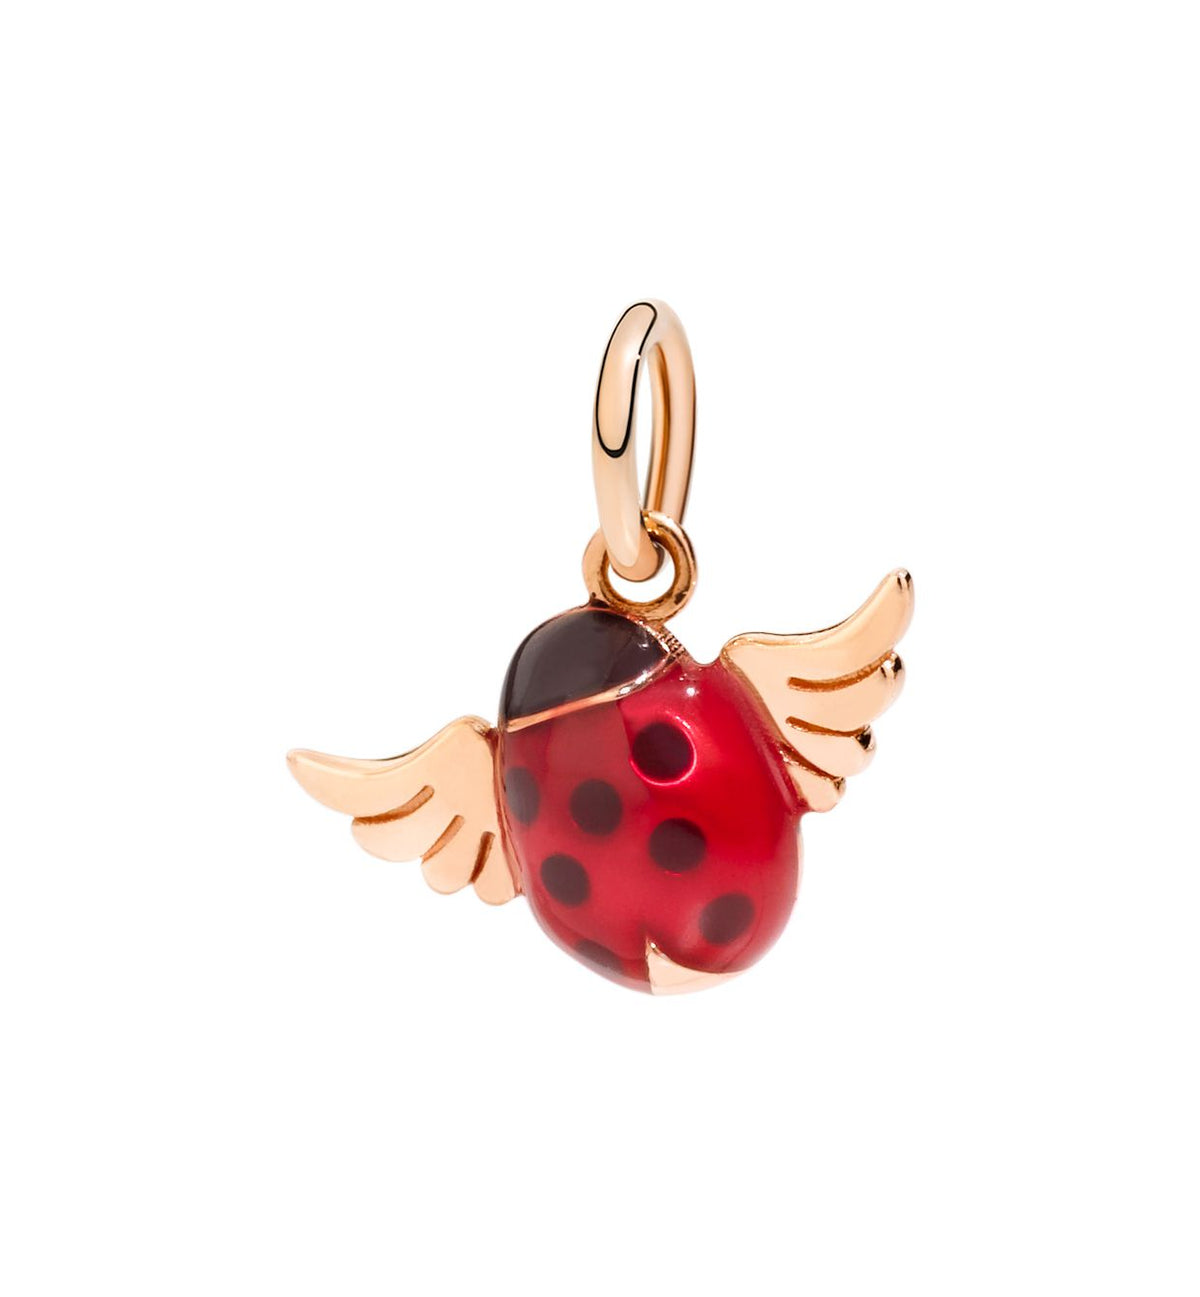 DoDo Ladybug with Wings Charm in 9k Rose Gold with Red Enamel - Orsini Jewellers NZ